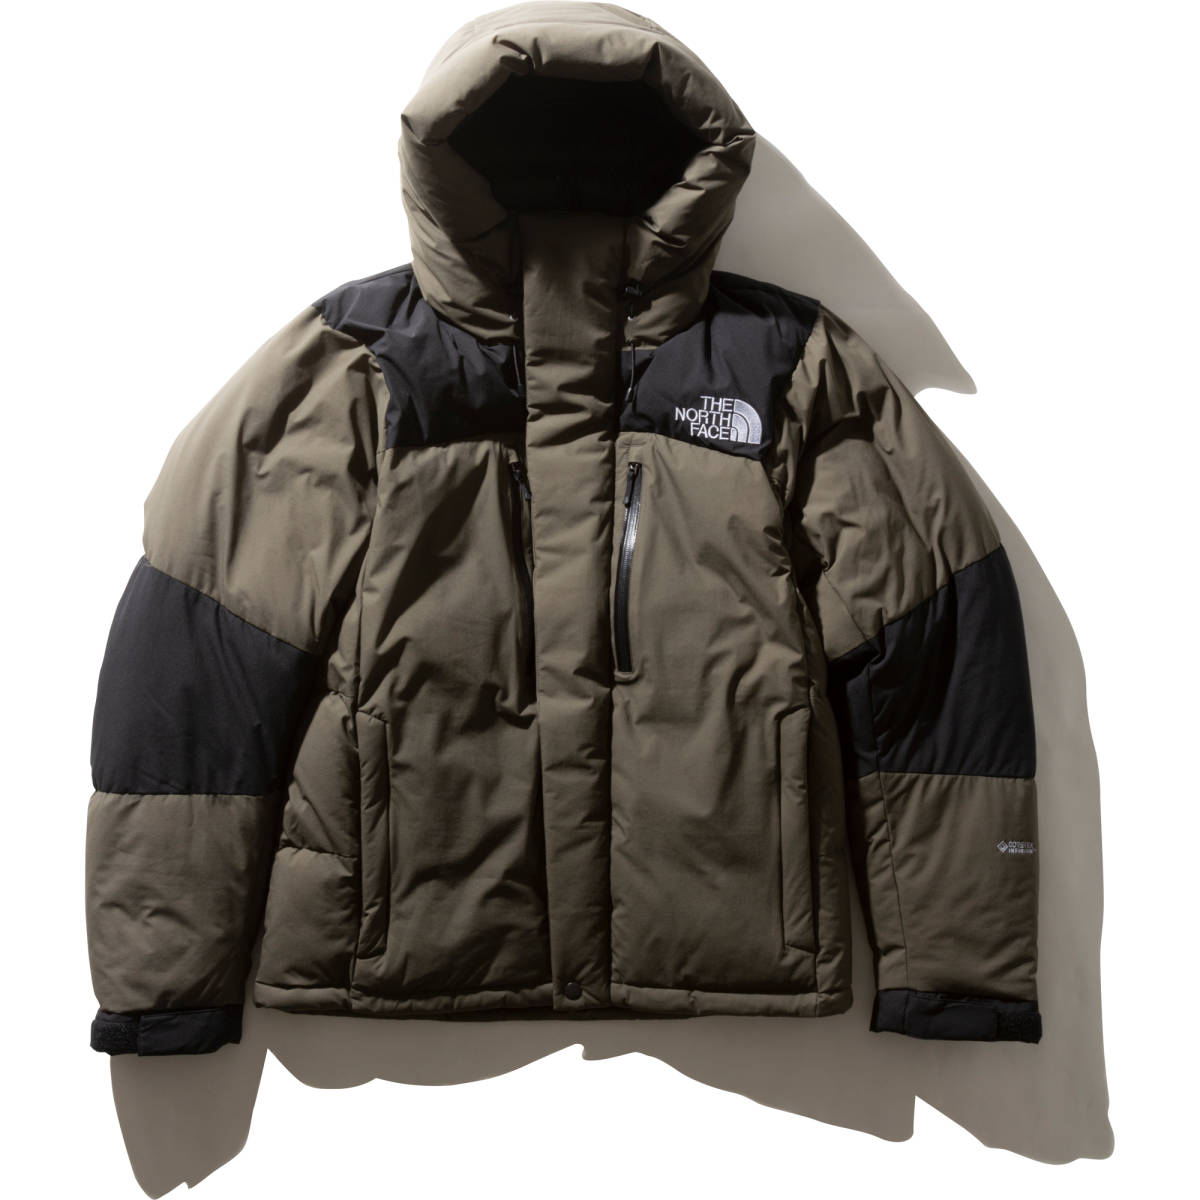 THE NORTH FACE 19FW Baltro Light Jacket ND91950 NT ニュートープ M